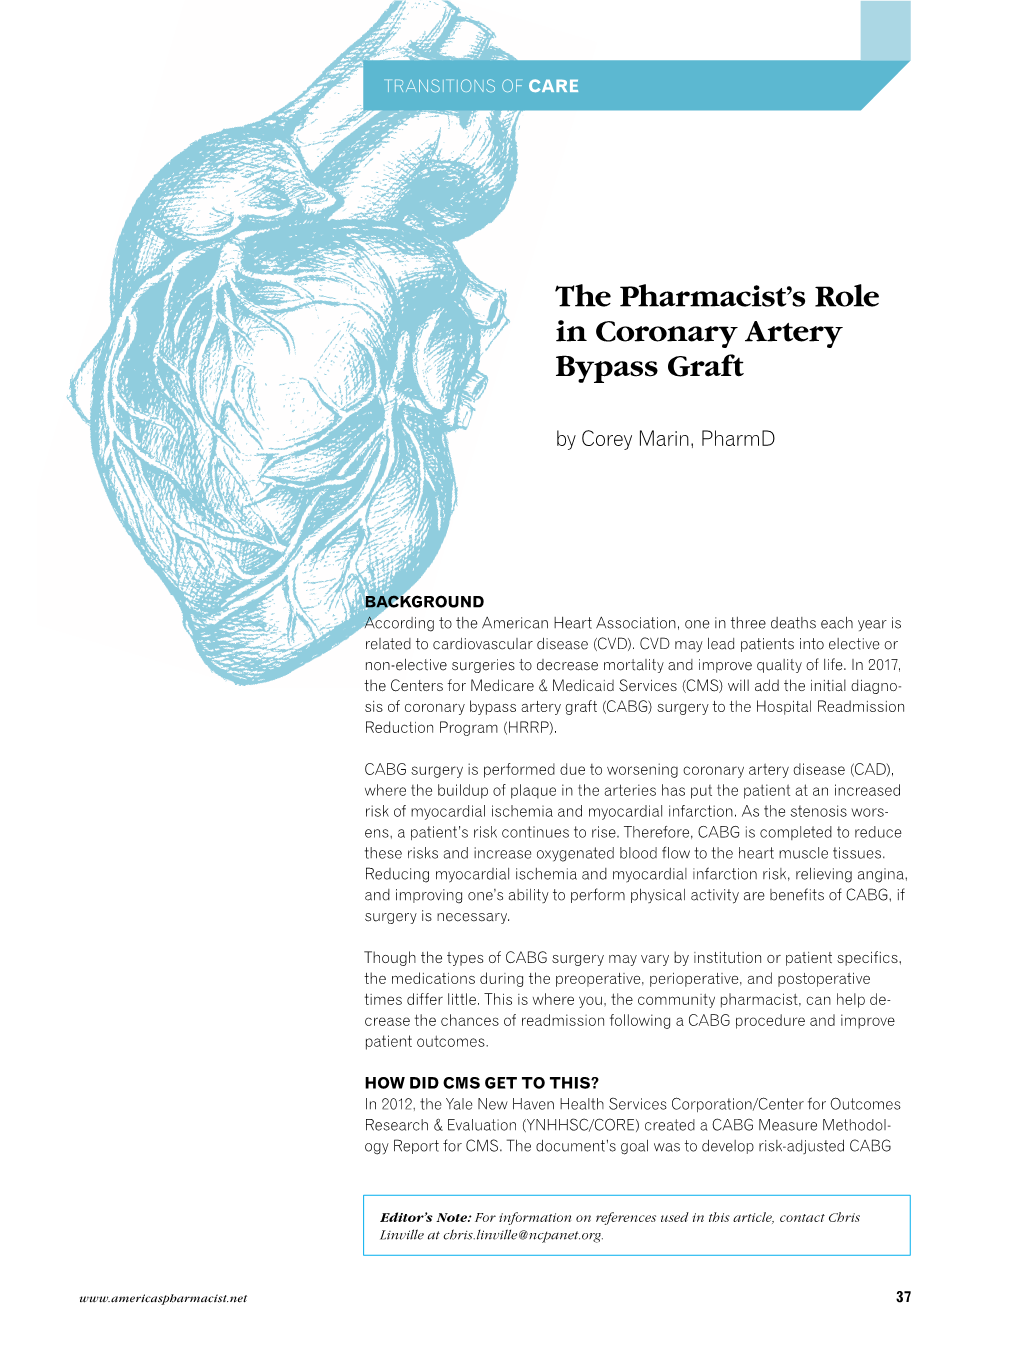 The Pharmacist's Role in Coronary Artery Bypass Graft